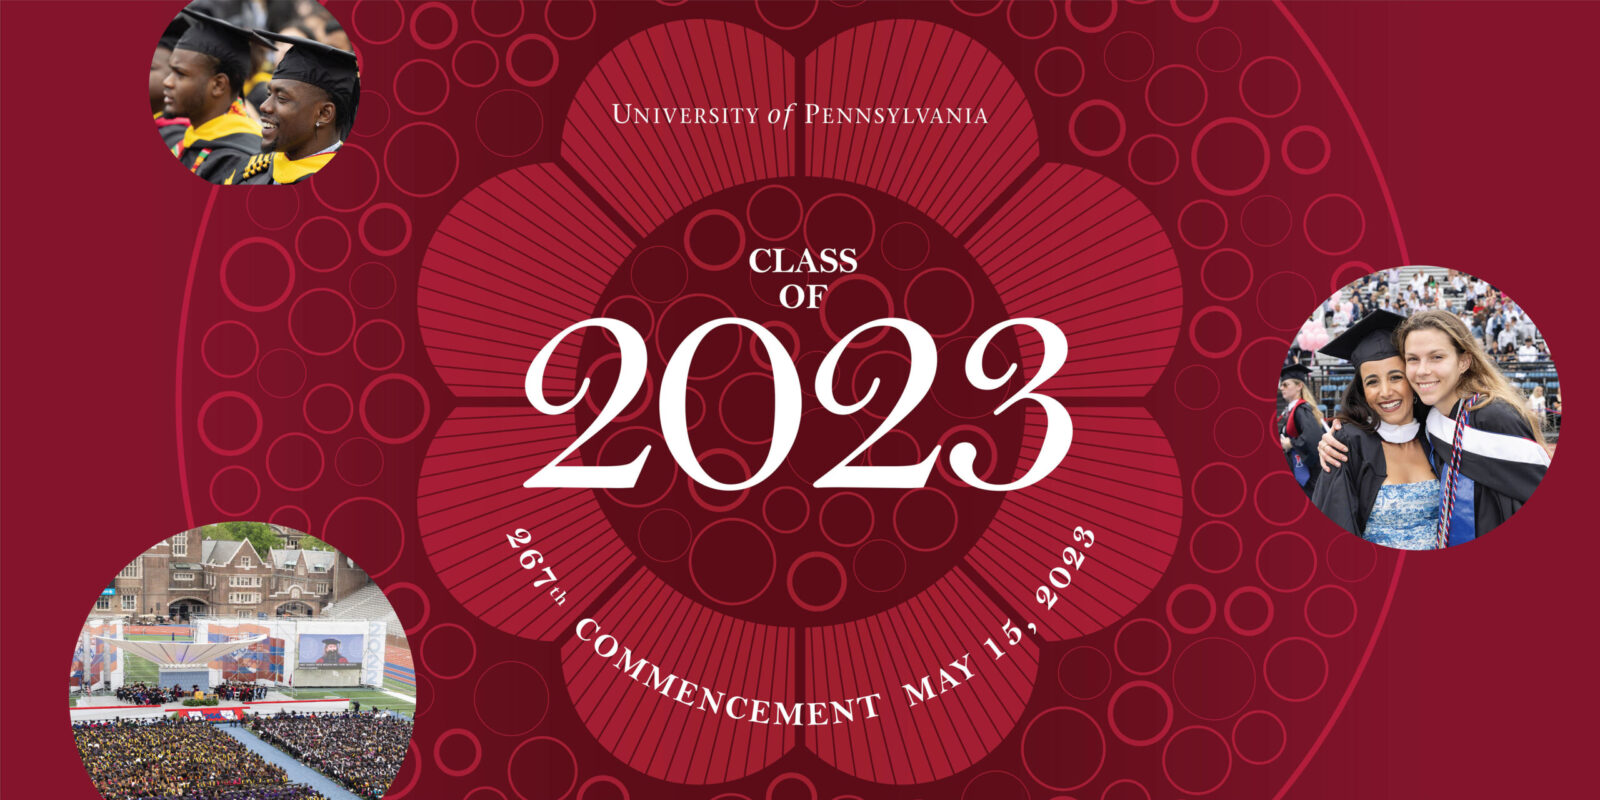 Commencement web banner for the Class of 2023